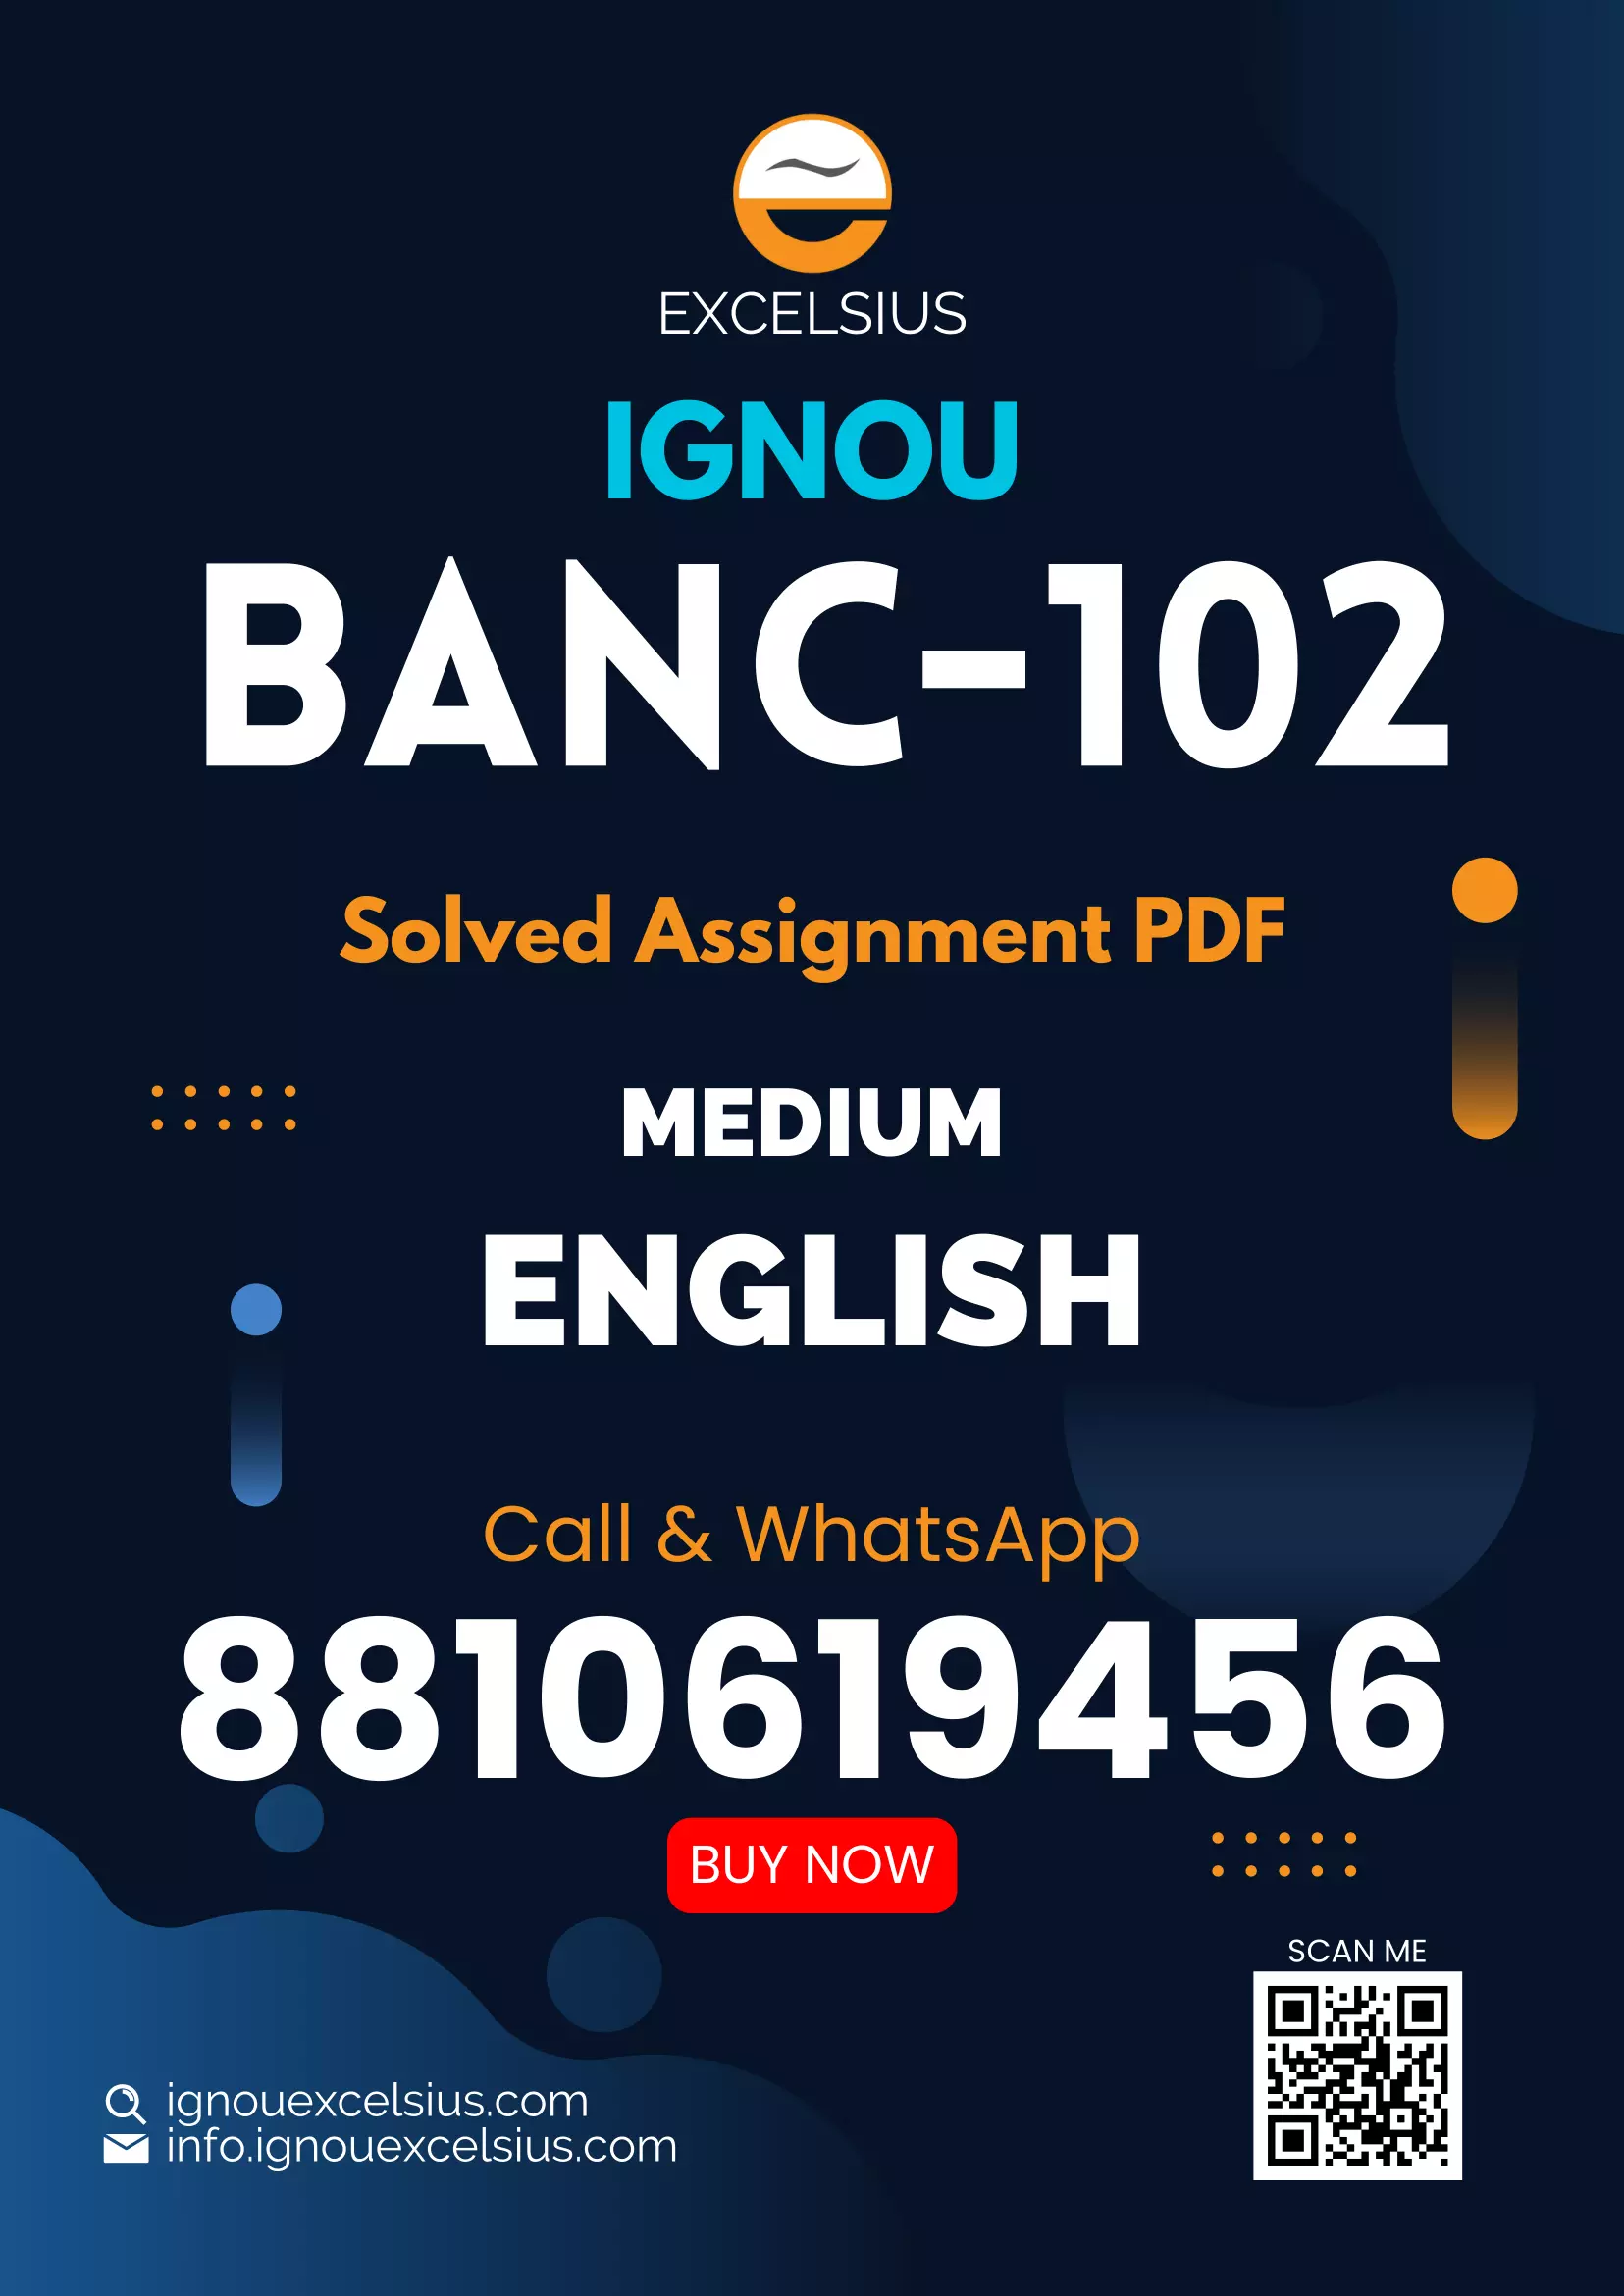 IGNOU BANC-102 - Introduction to Social and Cultural Anthropology, Latest Solved Assignment-July 2022 – January 2023